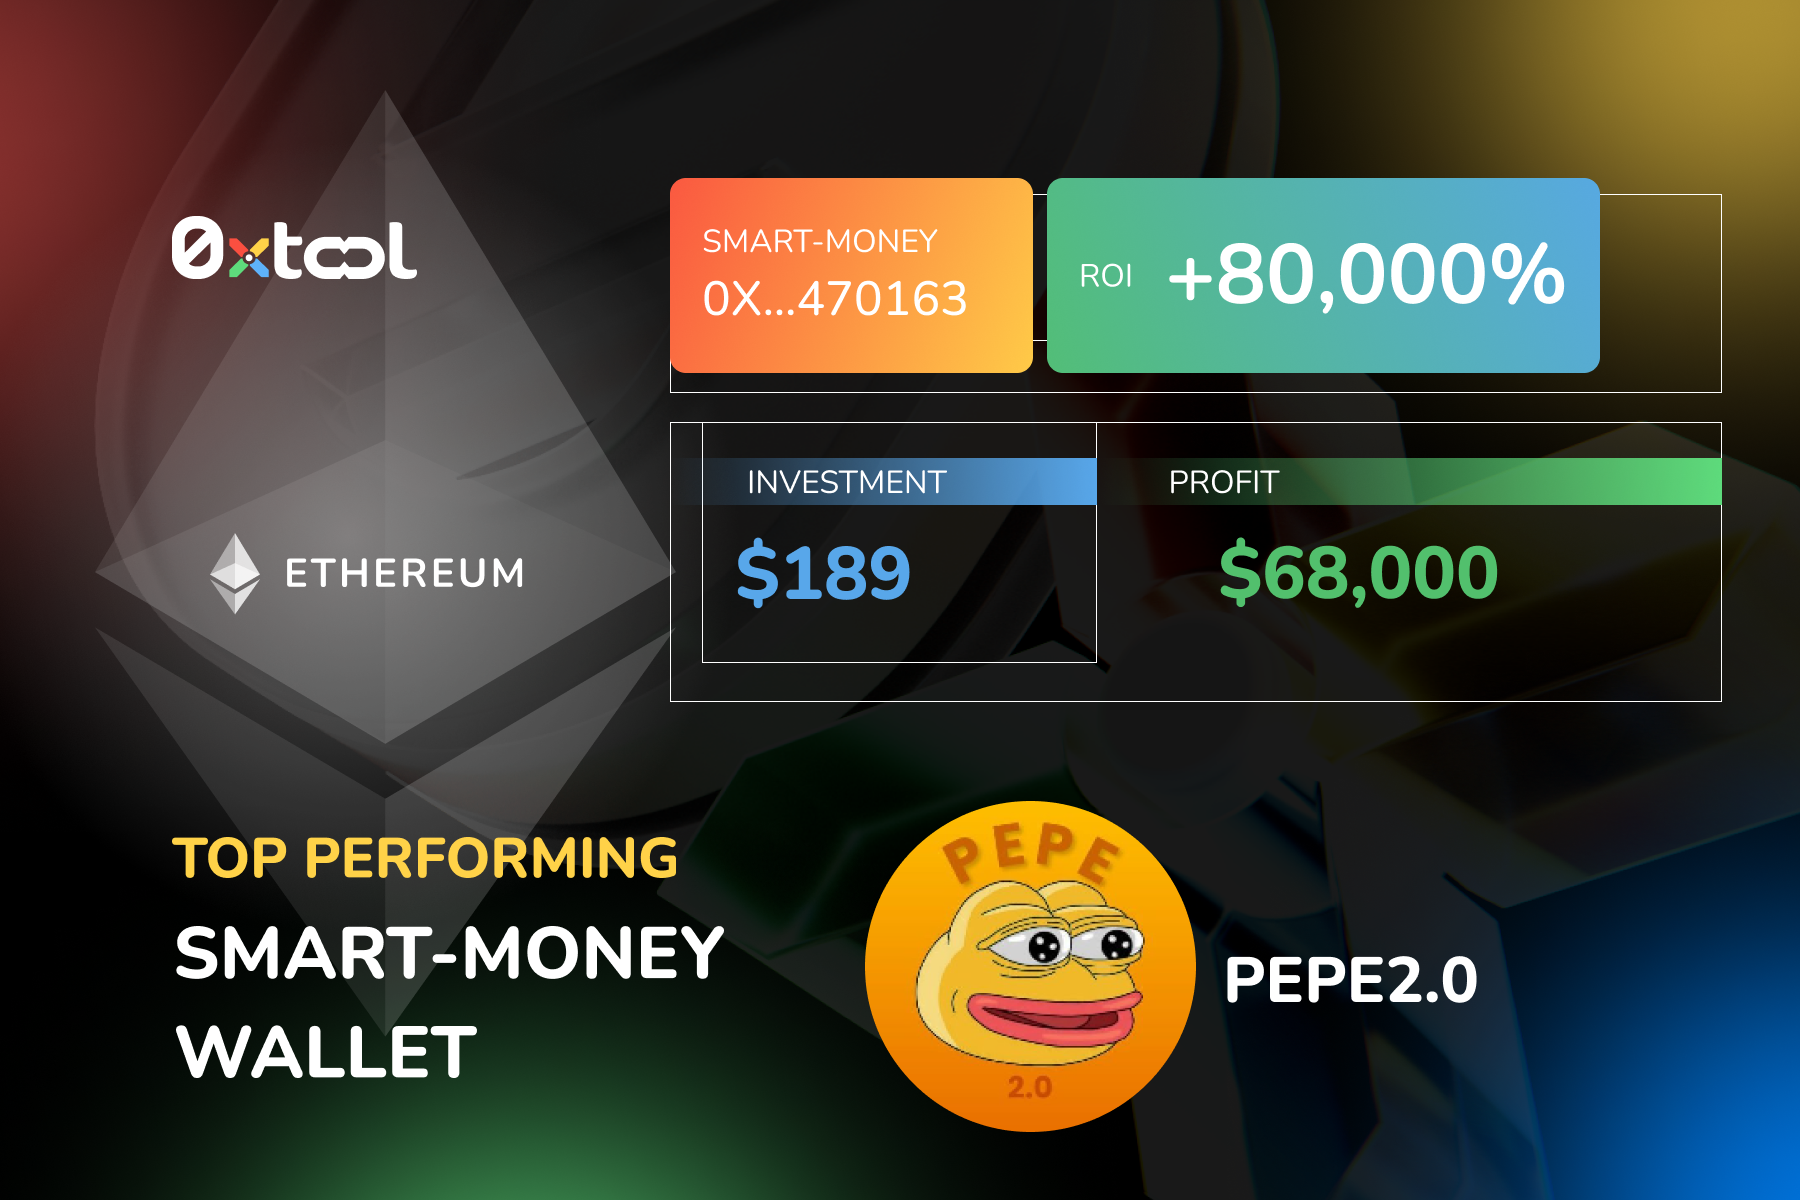 Let’s find out how a woman only invested $189 in PEPE2.0 and get a return of $68,000 in profit in just 1 day